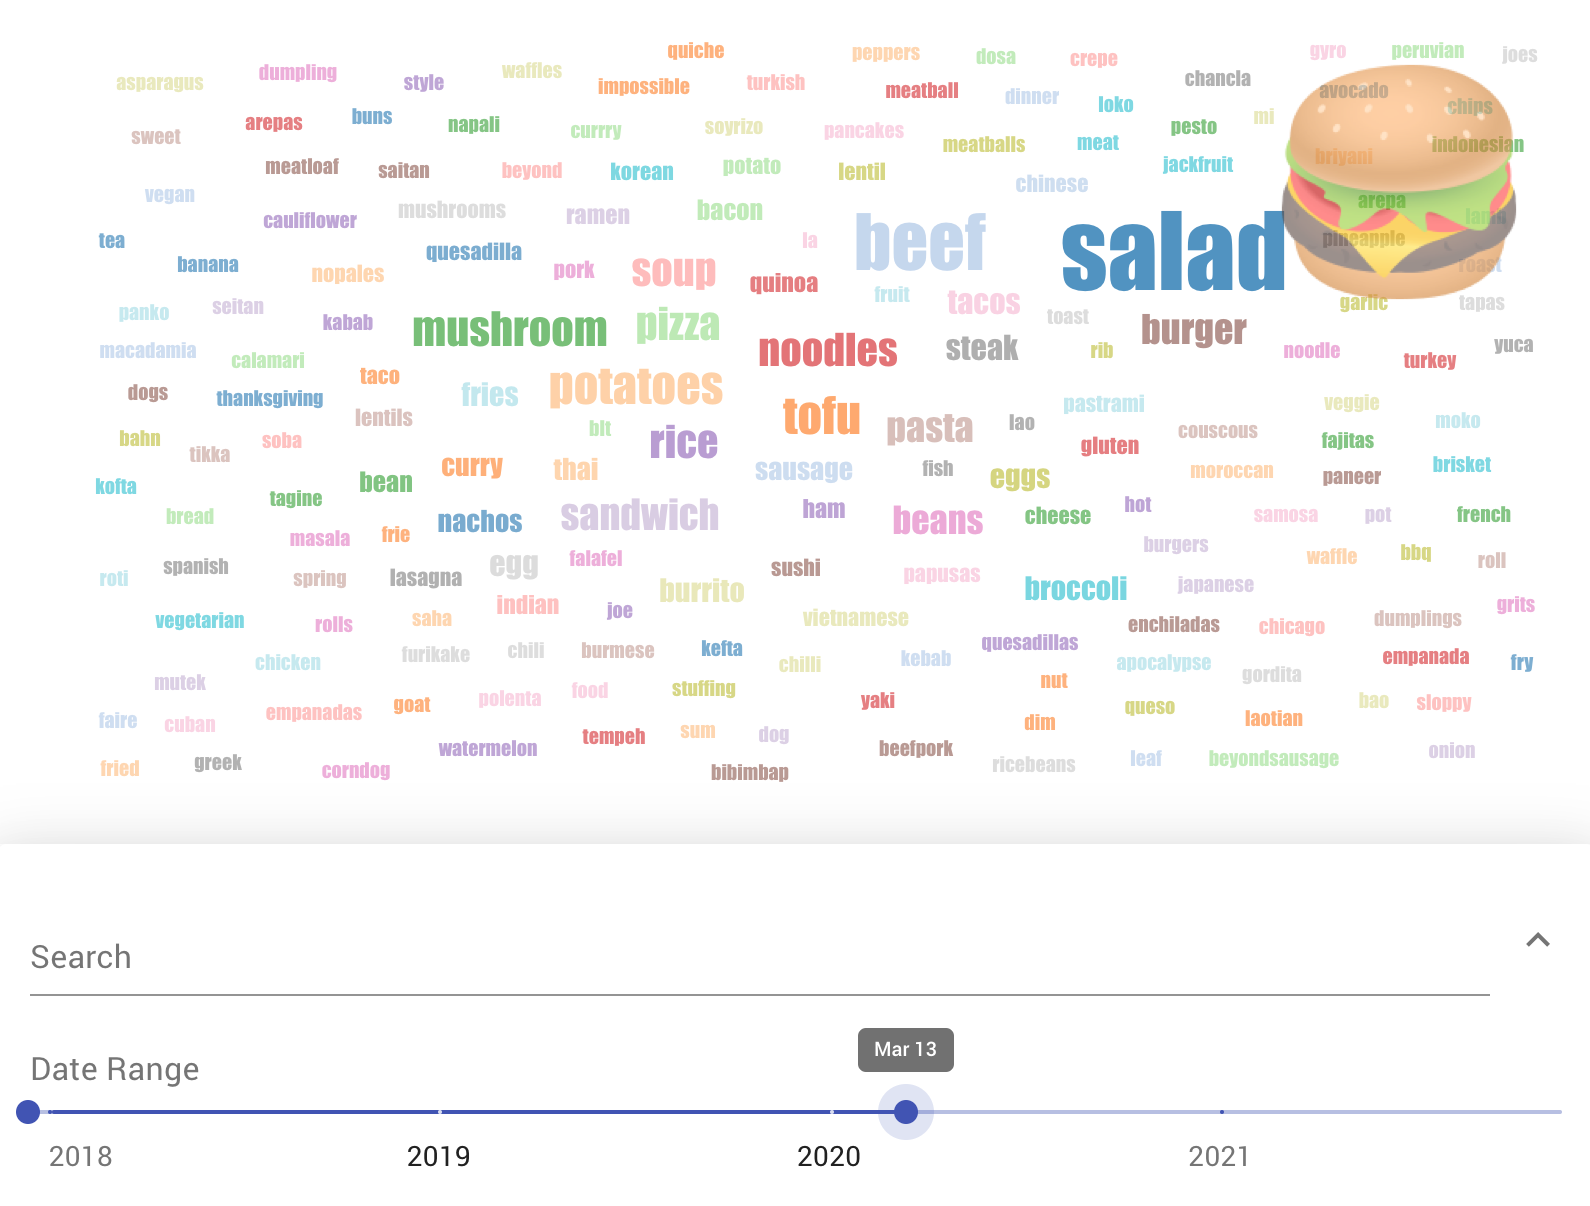 Wordcloud of ingredients and types of food from July 2019 to March 2020. The biggest are 'beef' and 'salad'